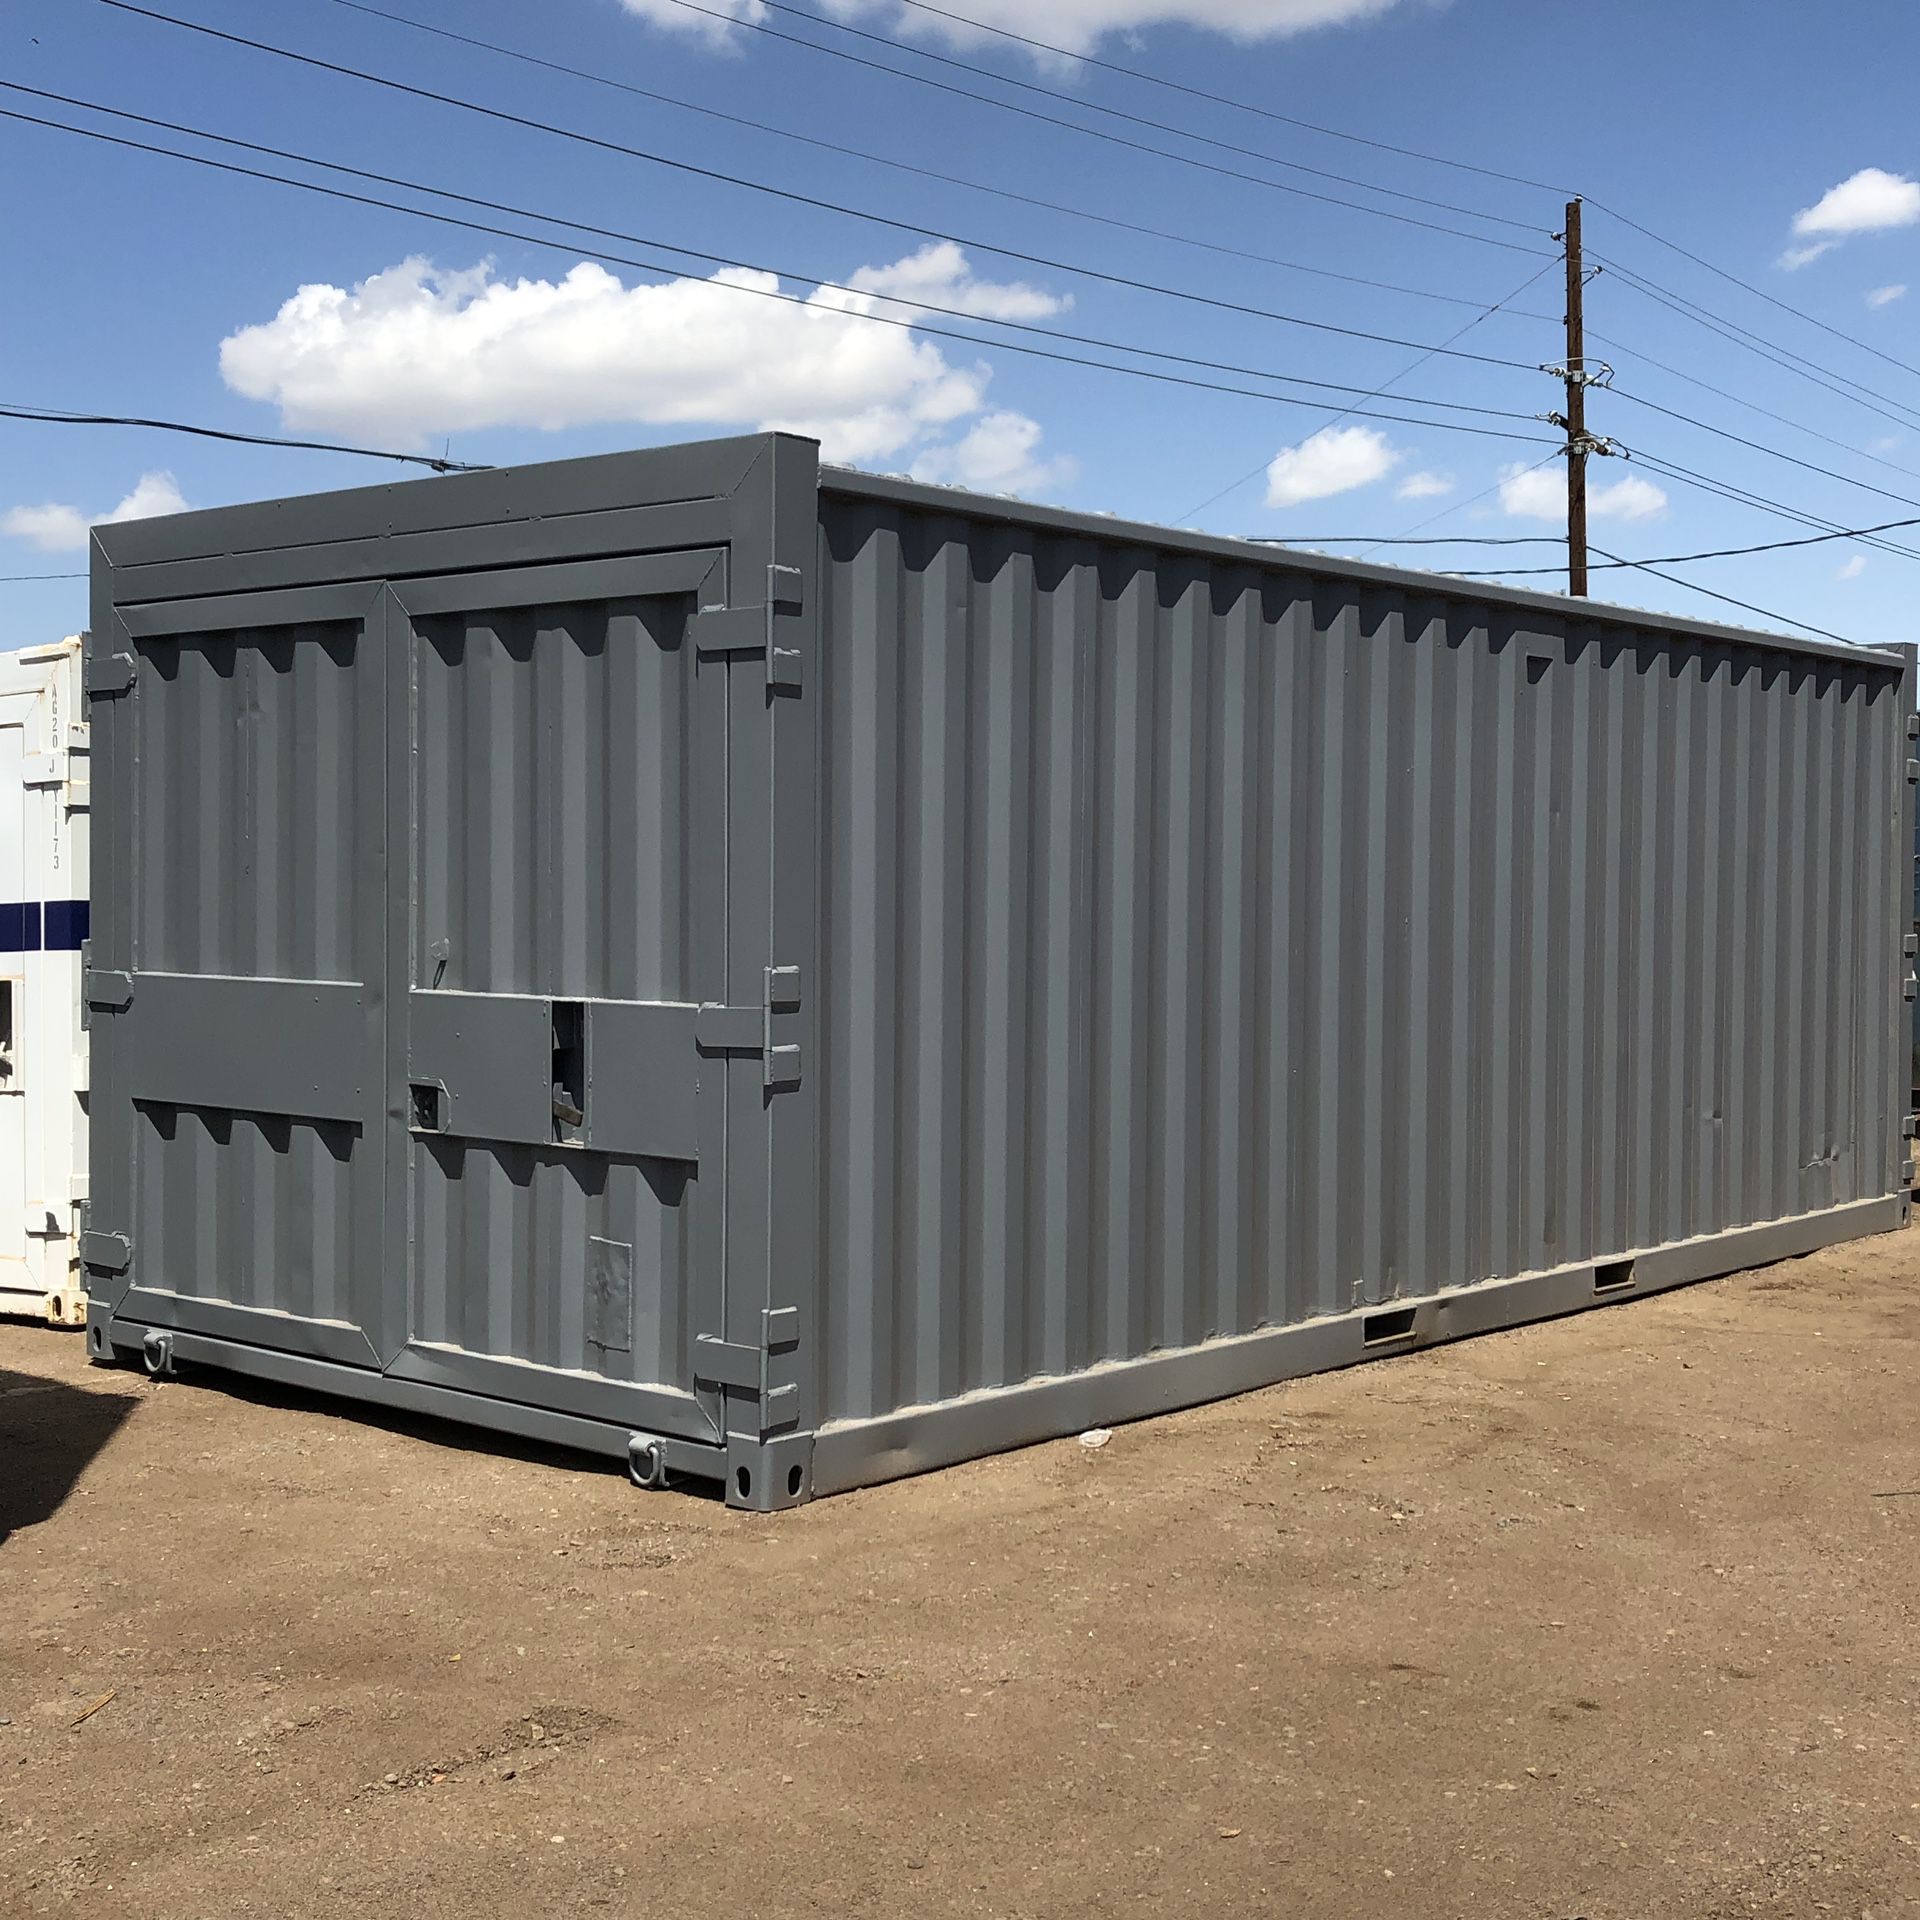 LOCAL extra wide 10' x 25' double end door shipping container connex storage A Grade cargo worthy wind and water tight car storage